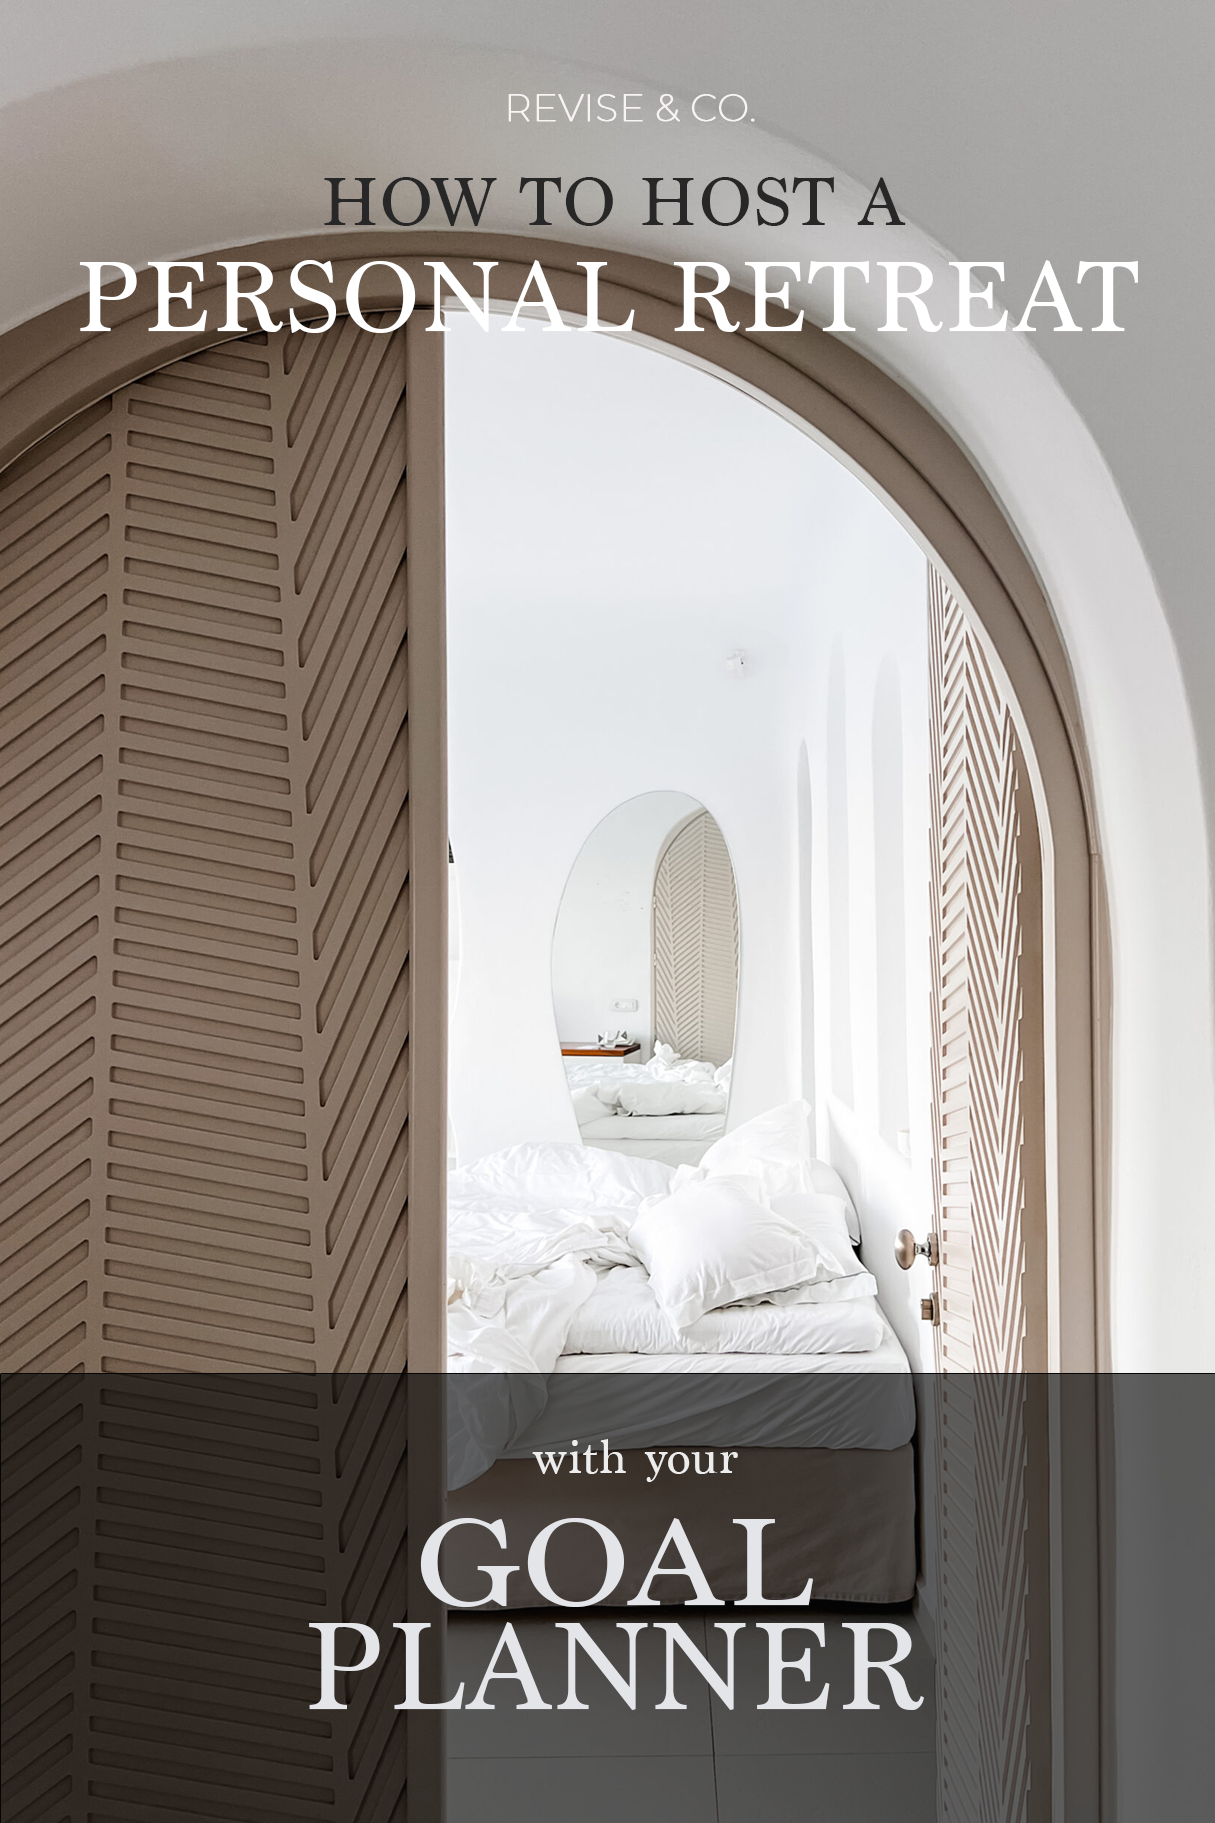 HOW TO HOST A PERSONAL RETREAT WITH YOUR GOAL PLANNER